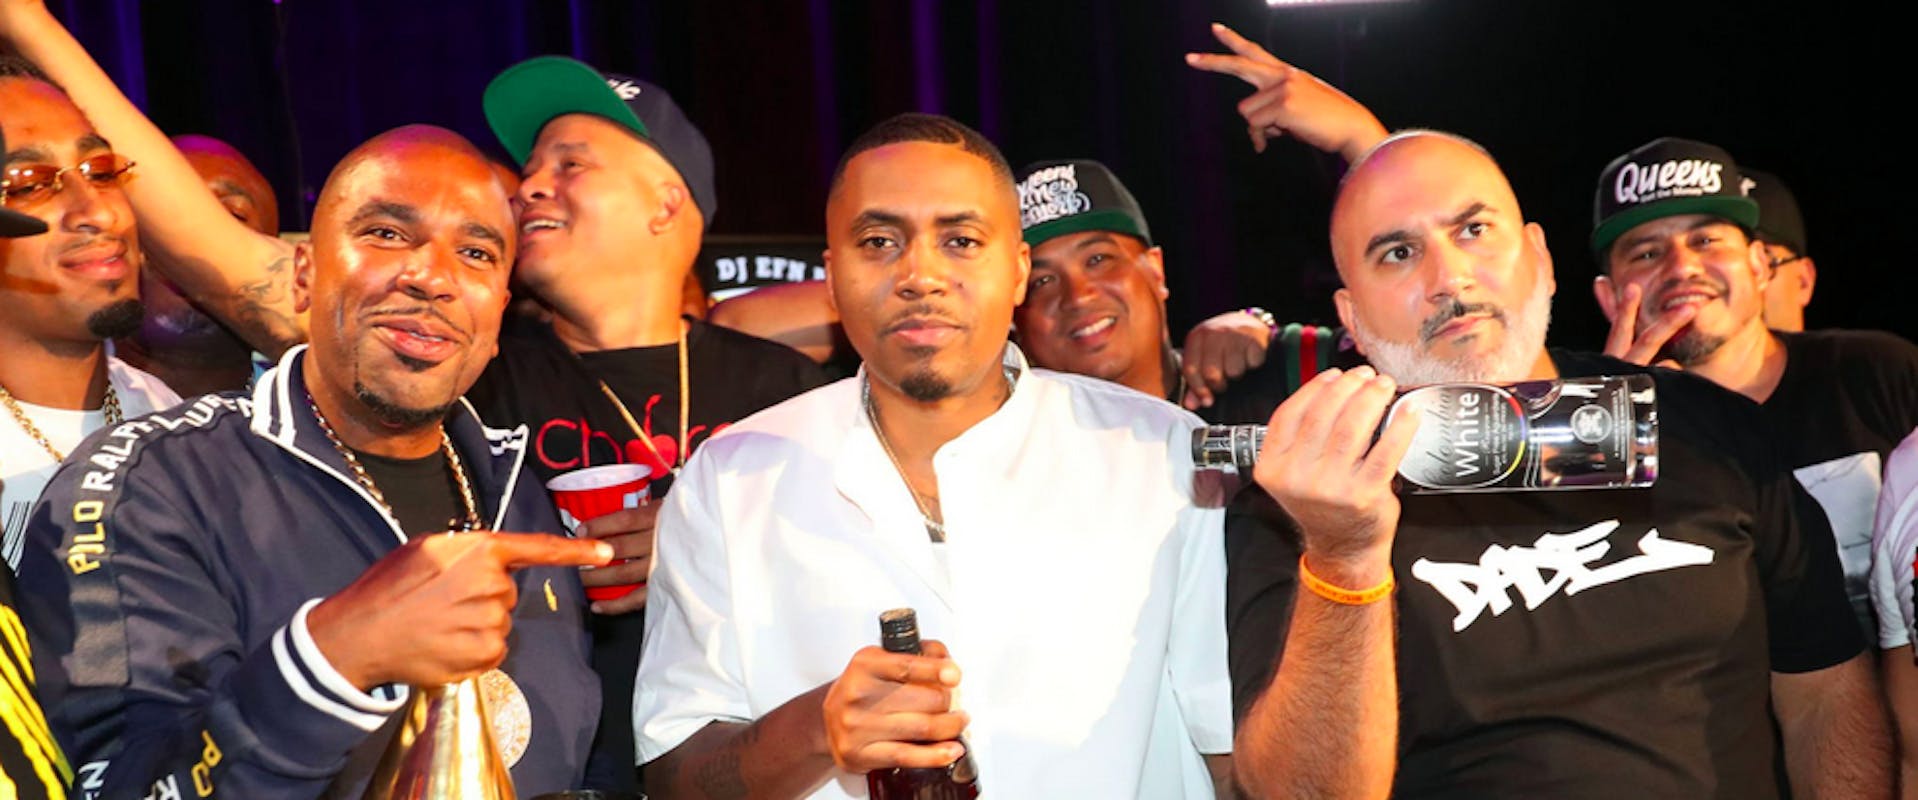 NEW YORK, NY - JULY 19: (L-R) N.O.R.E., Nas, and DJ EFN film an episode of Drink Champs during Nas' "The Lost Tapes 2" release party on July 19, 2019 in New York City. (Photo by Johnny Nunez/WireImage)